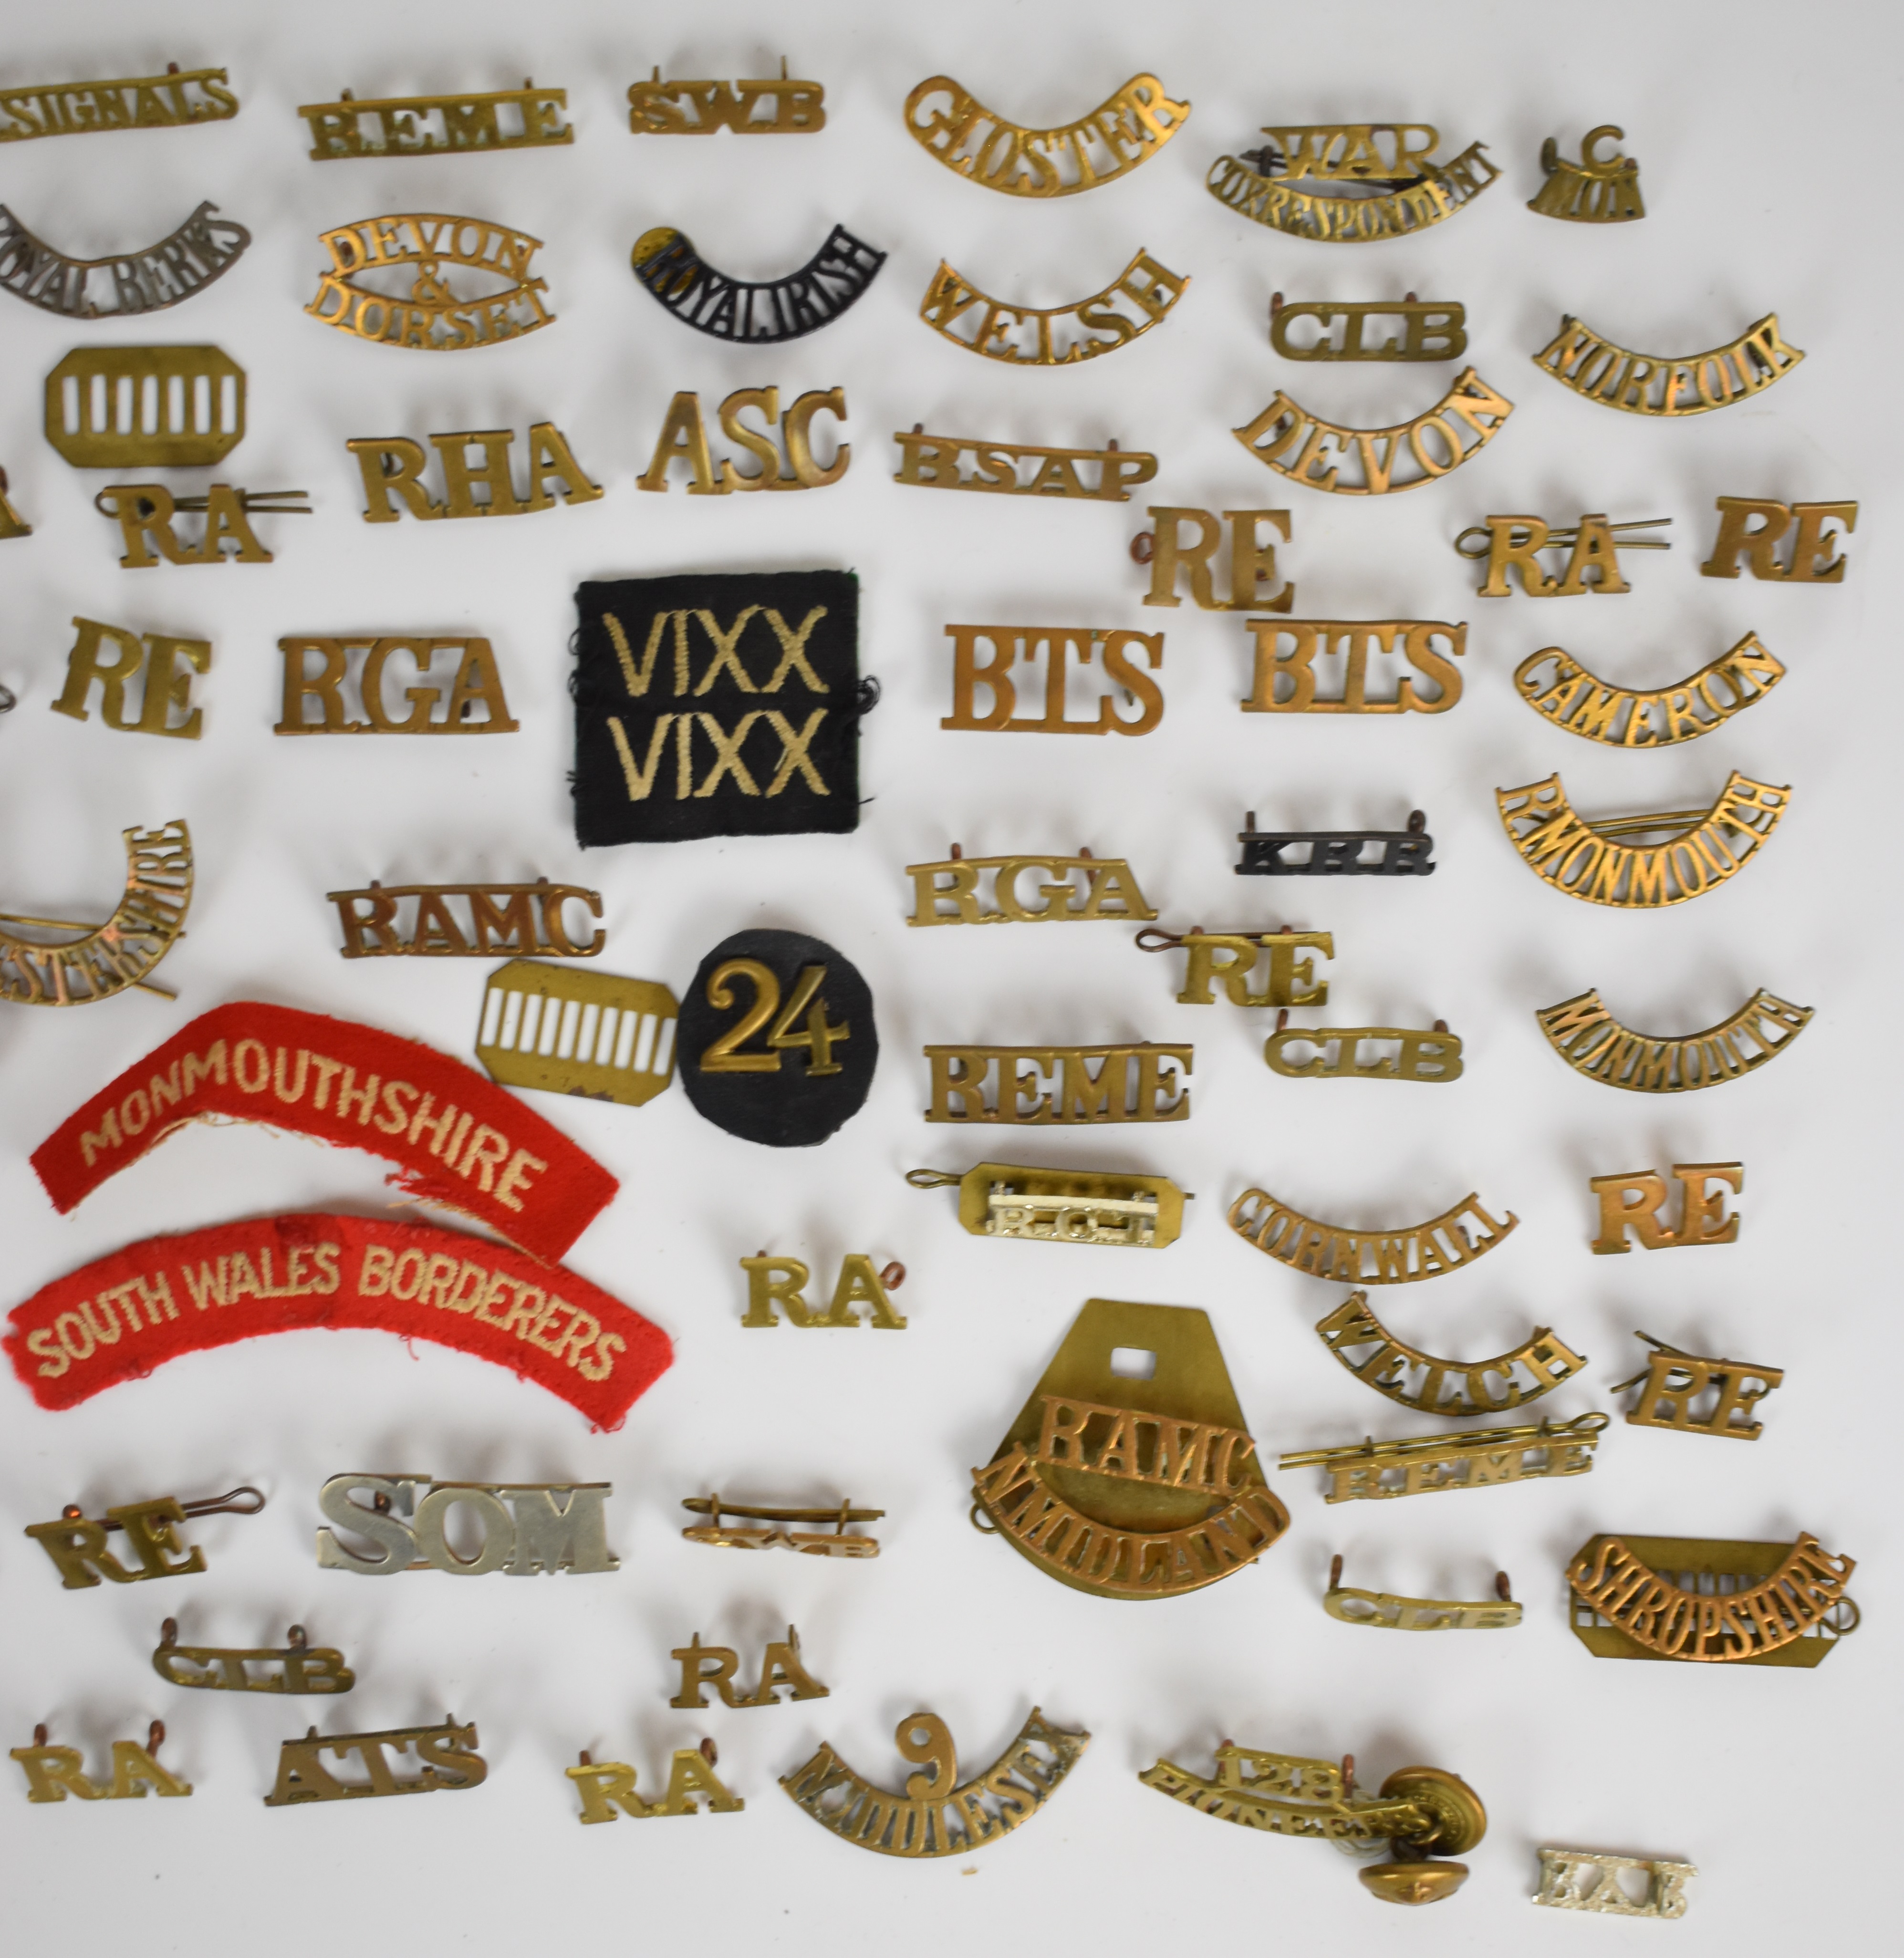 Large collection of approximately 90 British Army shoulder titles including 9th Middlesex, - Image 3 of 6